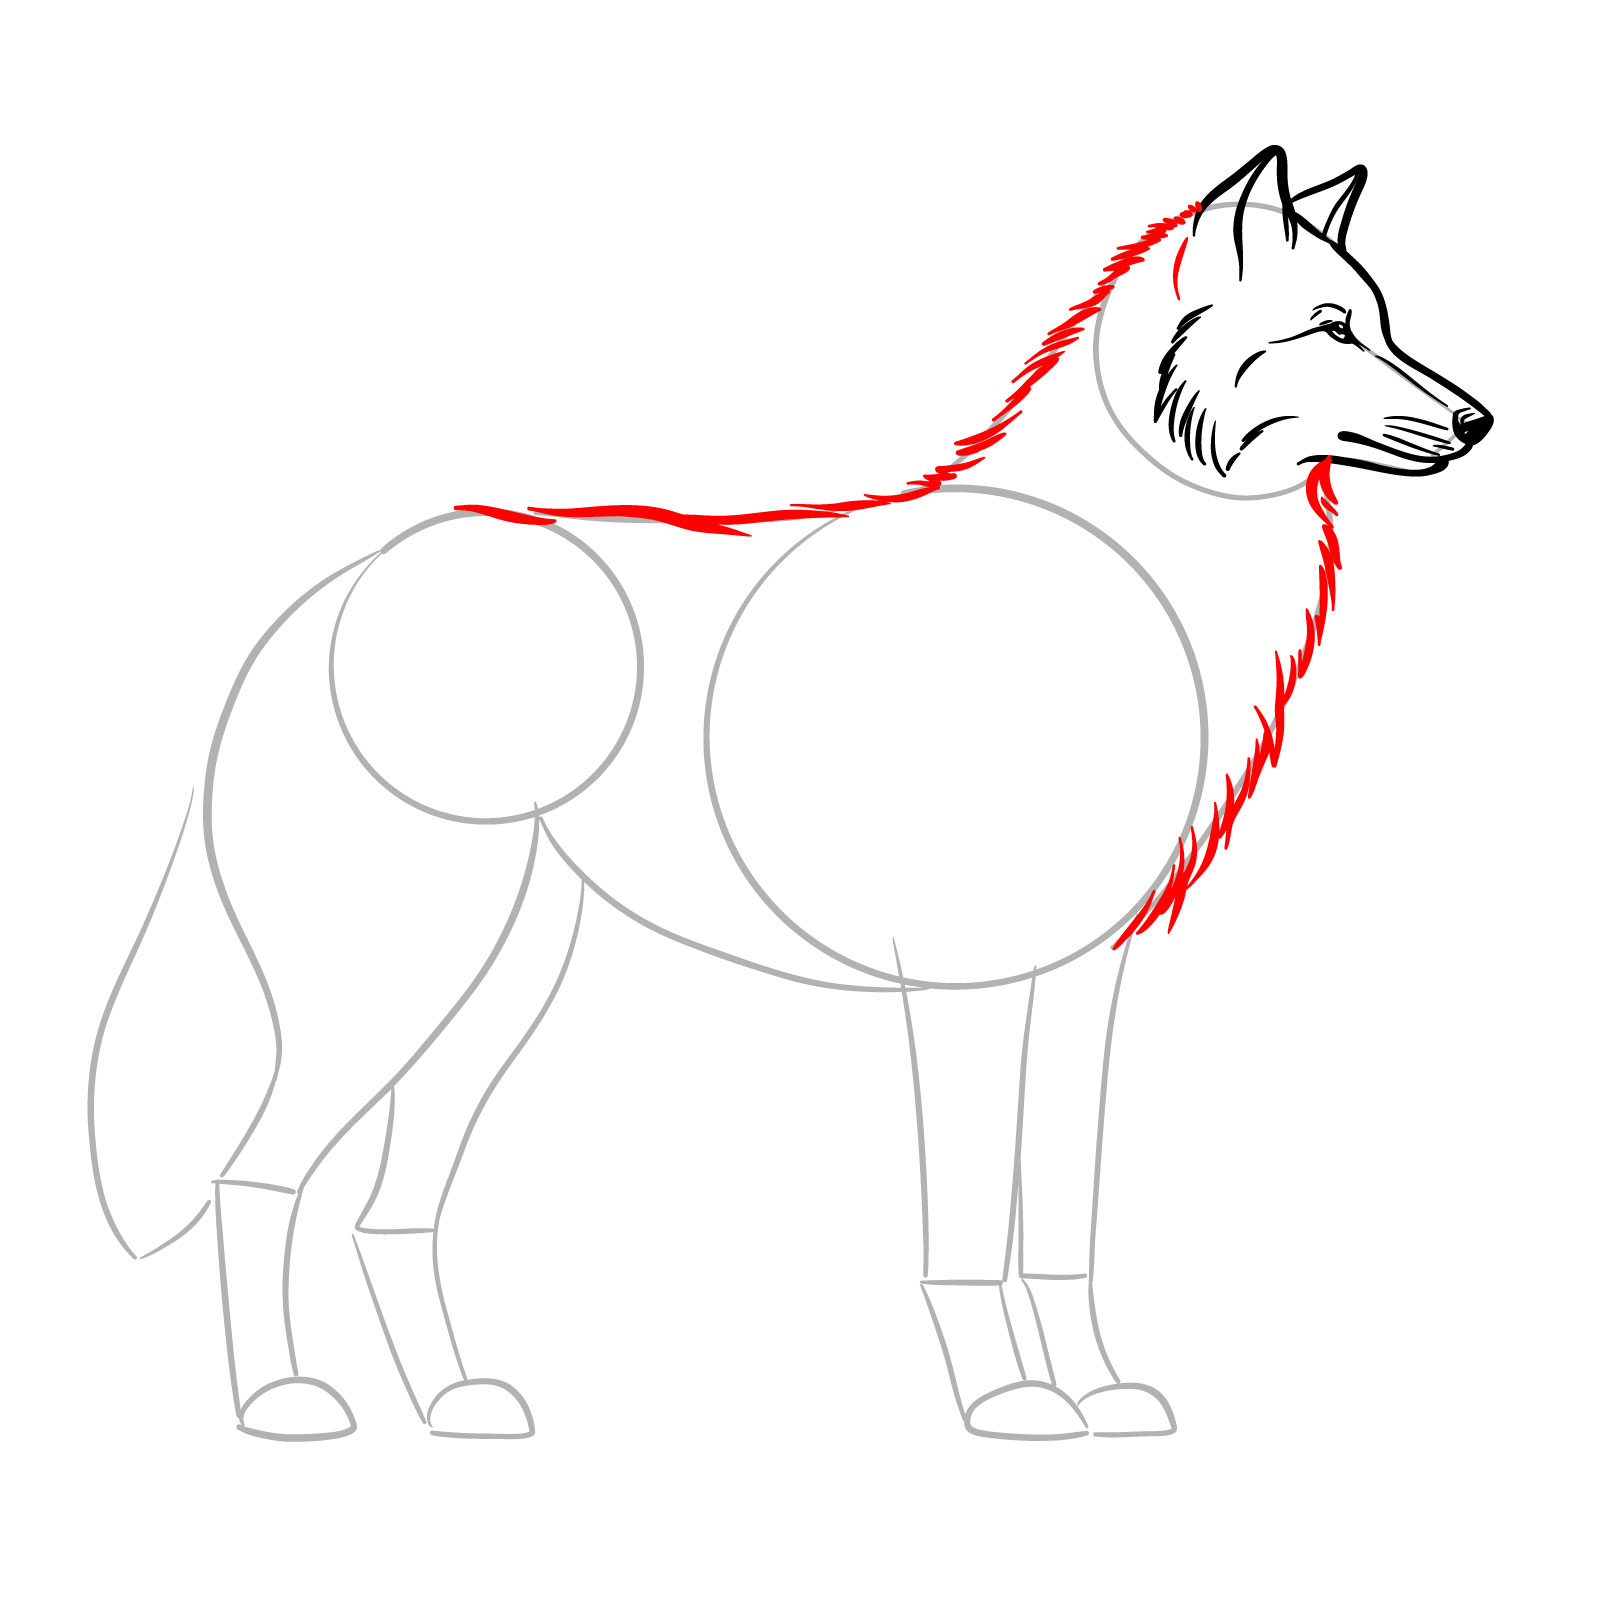 Drawing fur texture on the wolf's neck and back for a side view wolf drawing - step 08